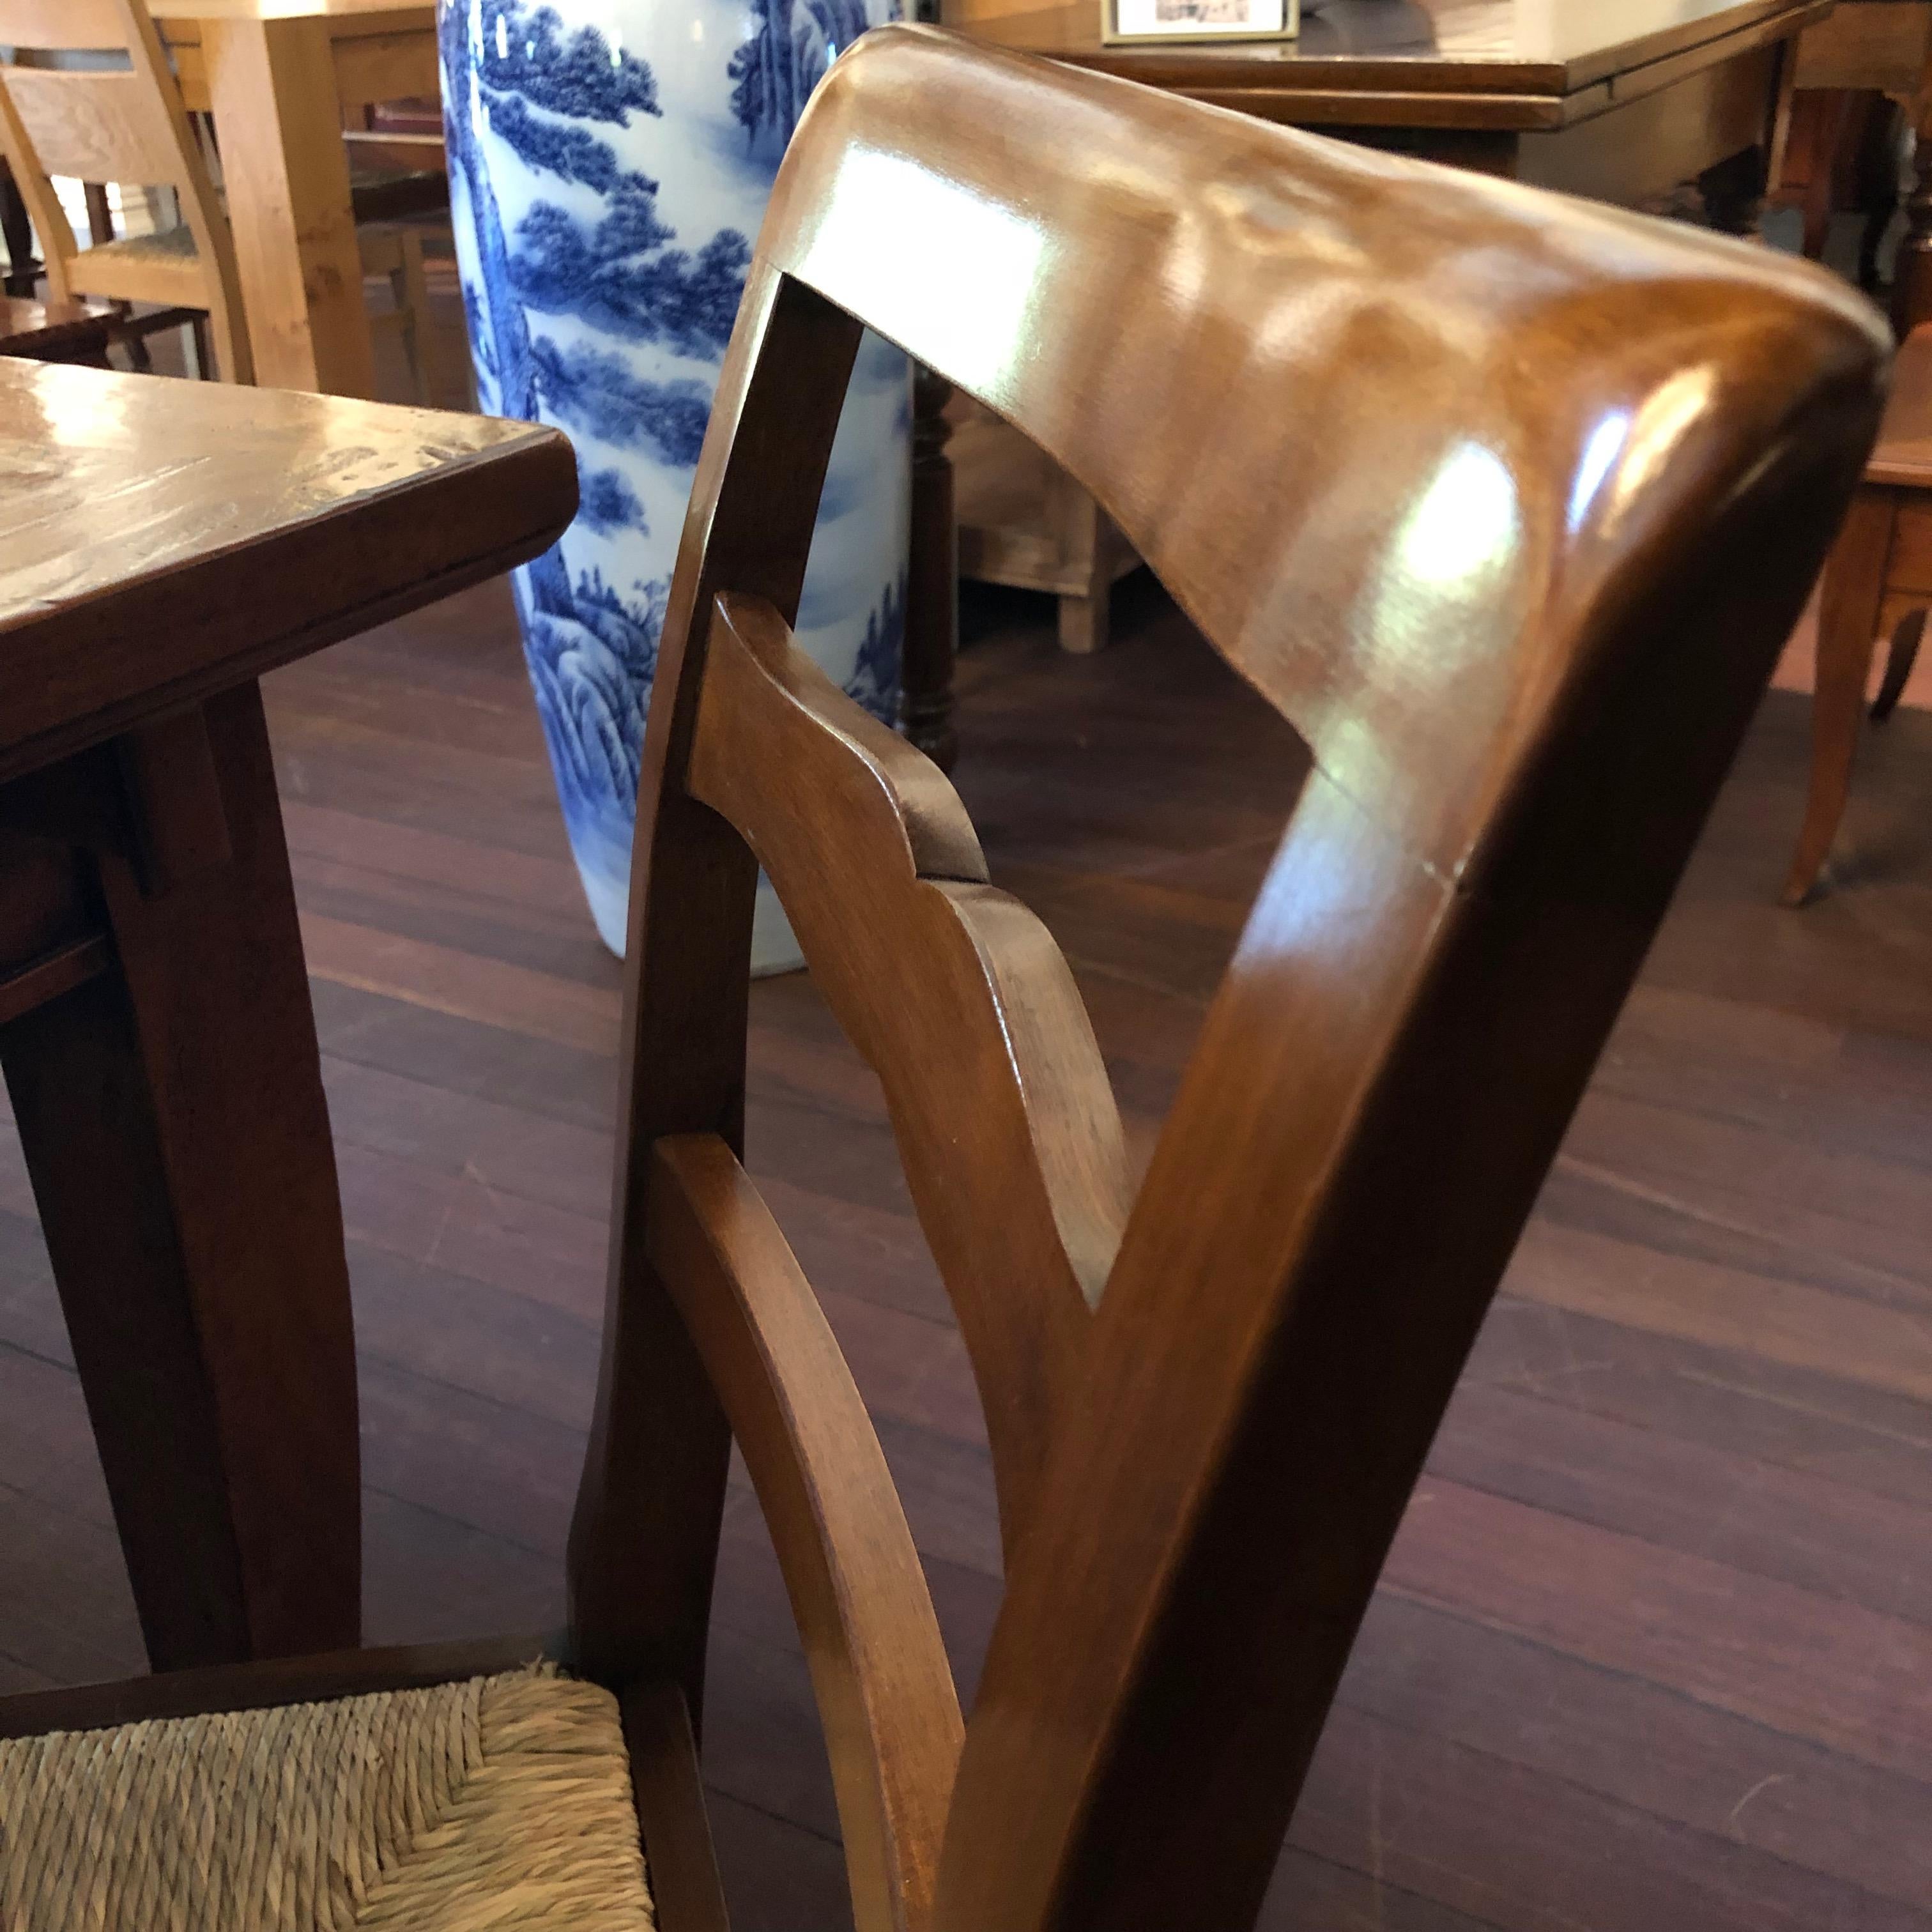 There are 10 of these rustic Italian walnut ladder back dining chairs currently available. They feature beautiful rush seating with hand carved, delicately rounded ladder backs and slightly curved legs. These chairs have been handcrafted in Italy